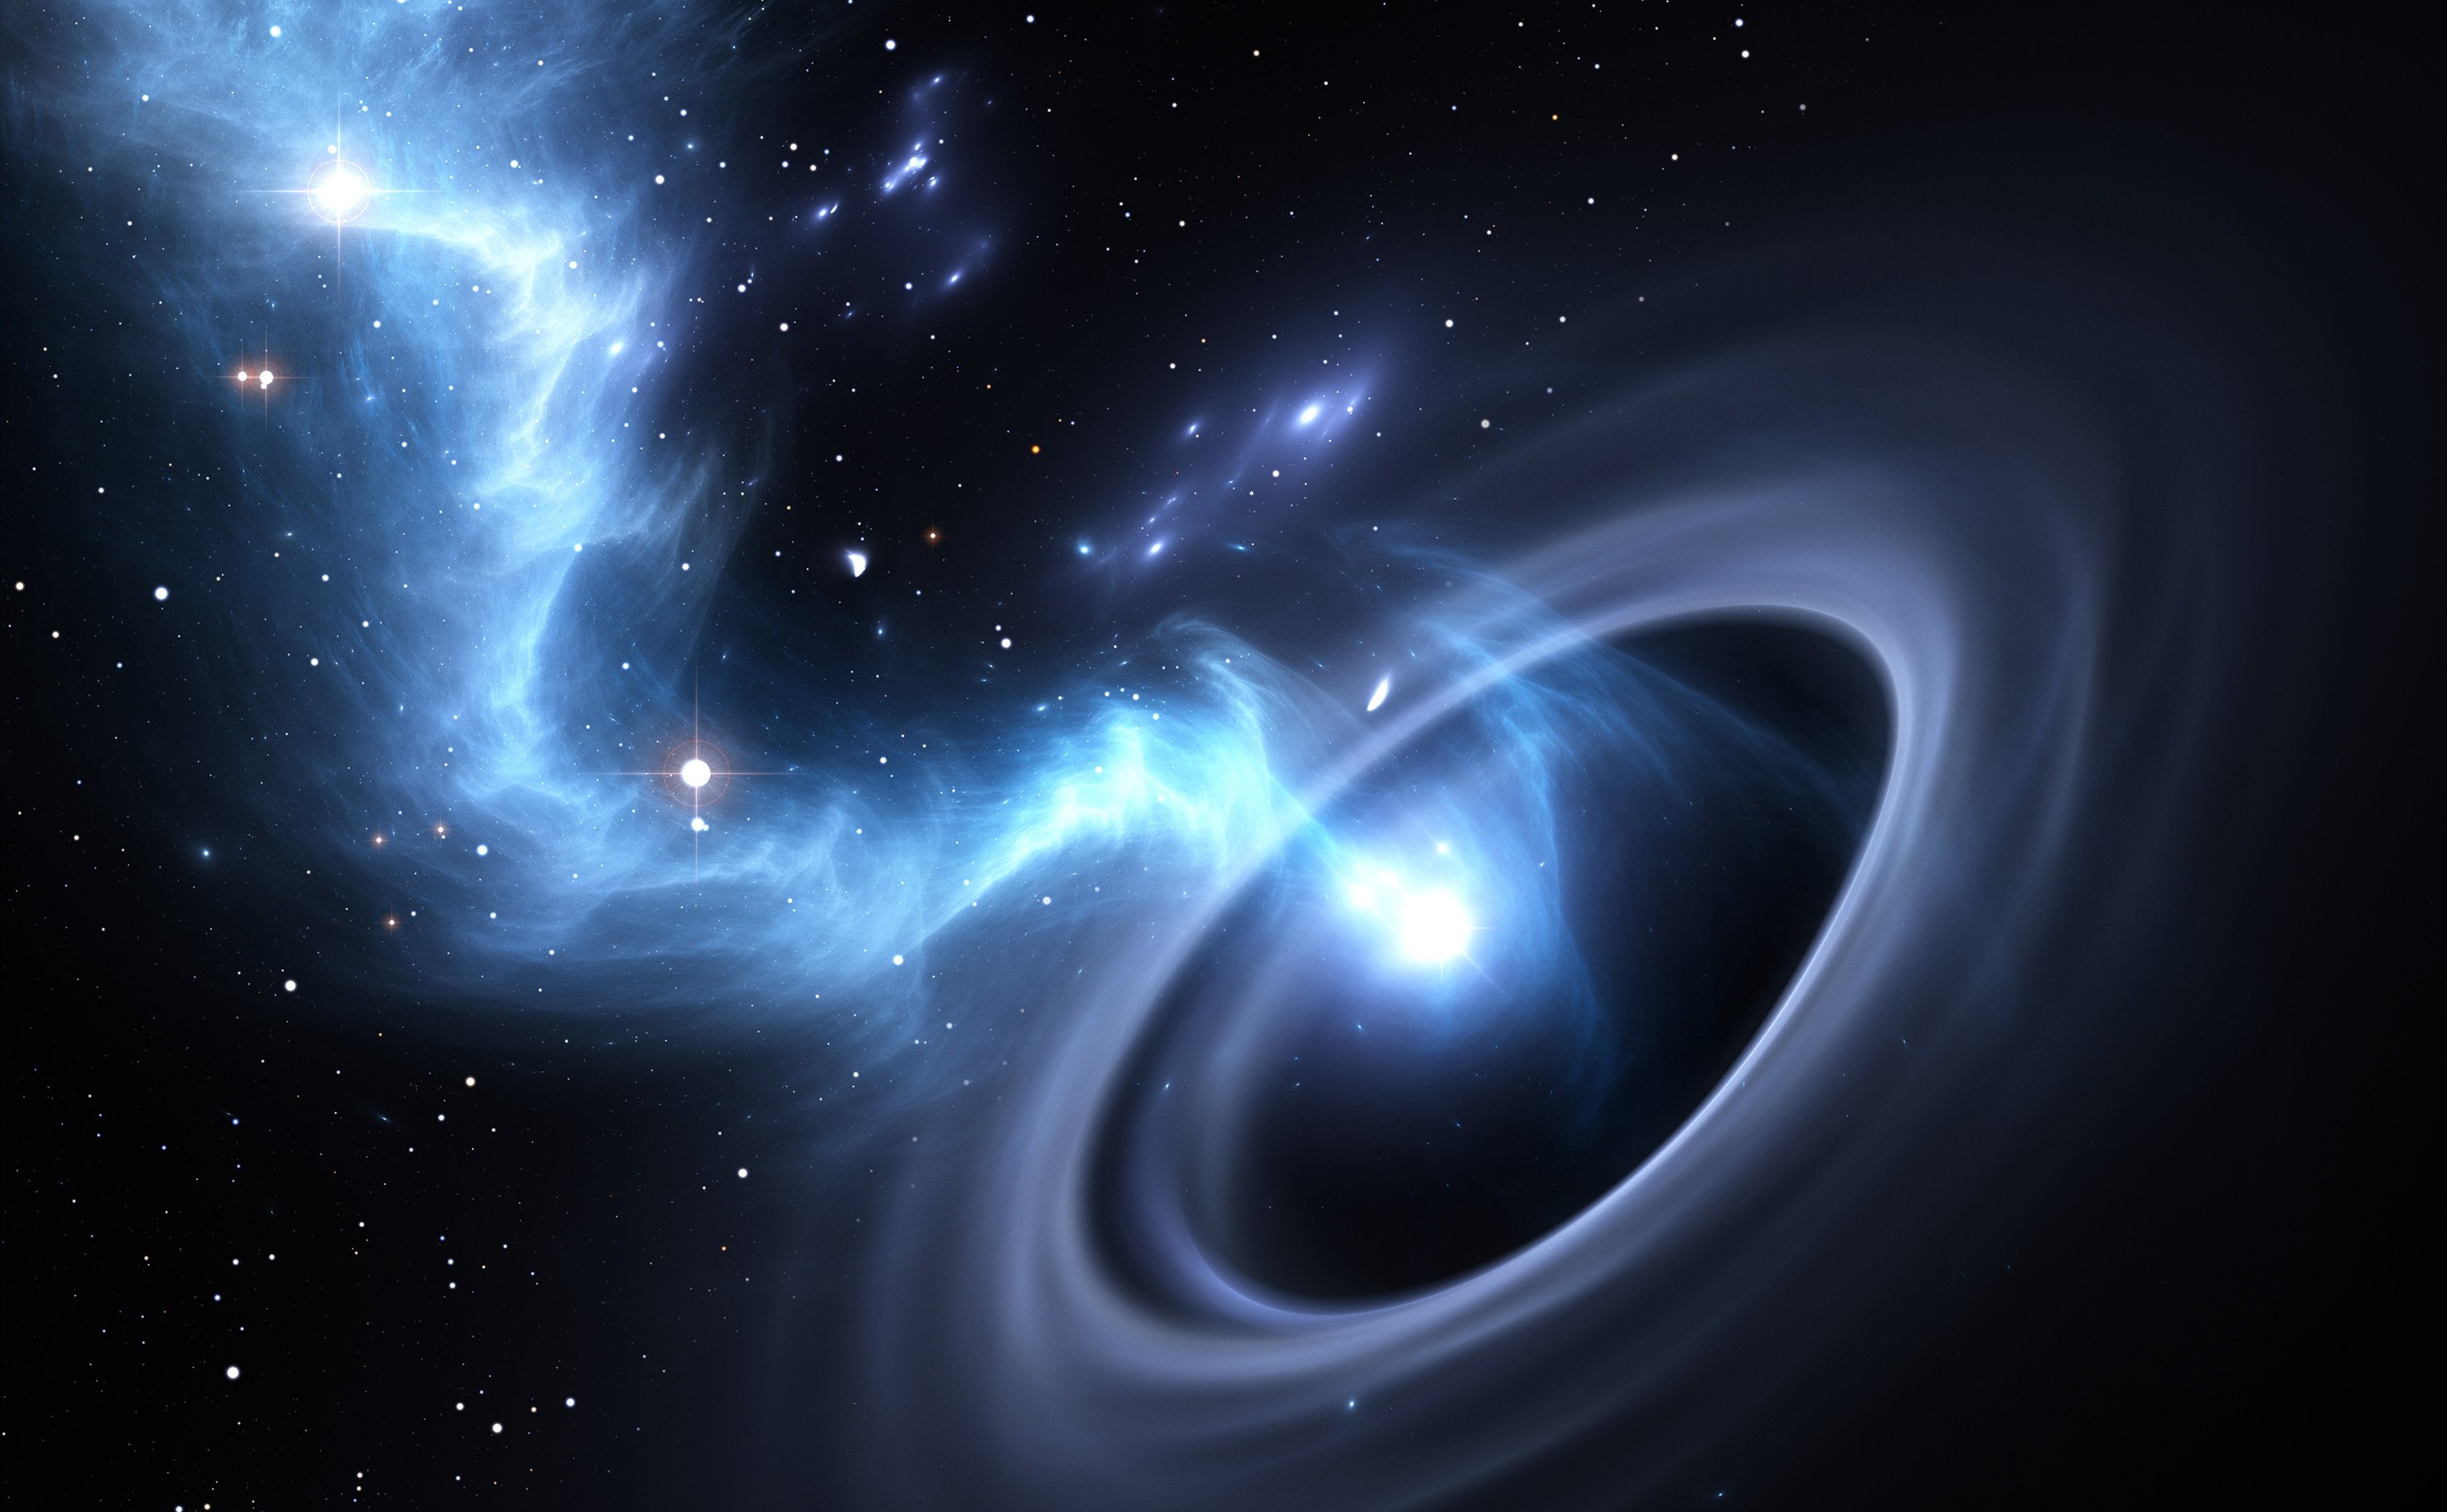 Stars and material falls into a black hole. Photo: Shutterstock